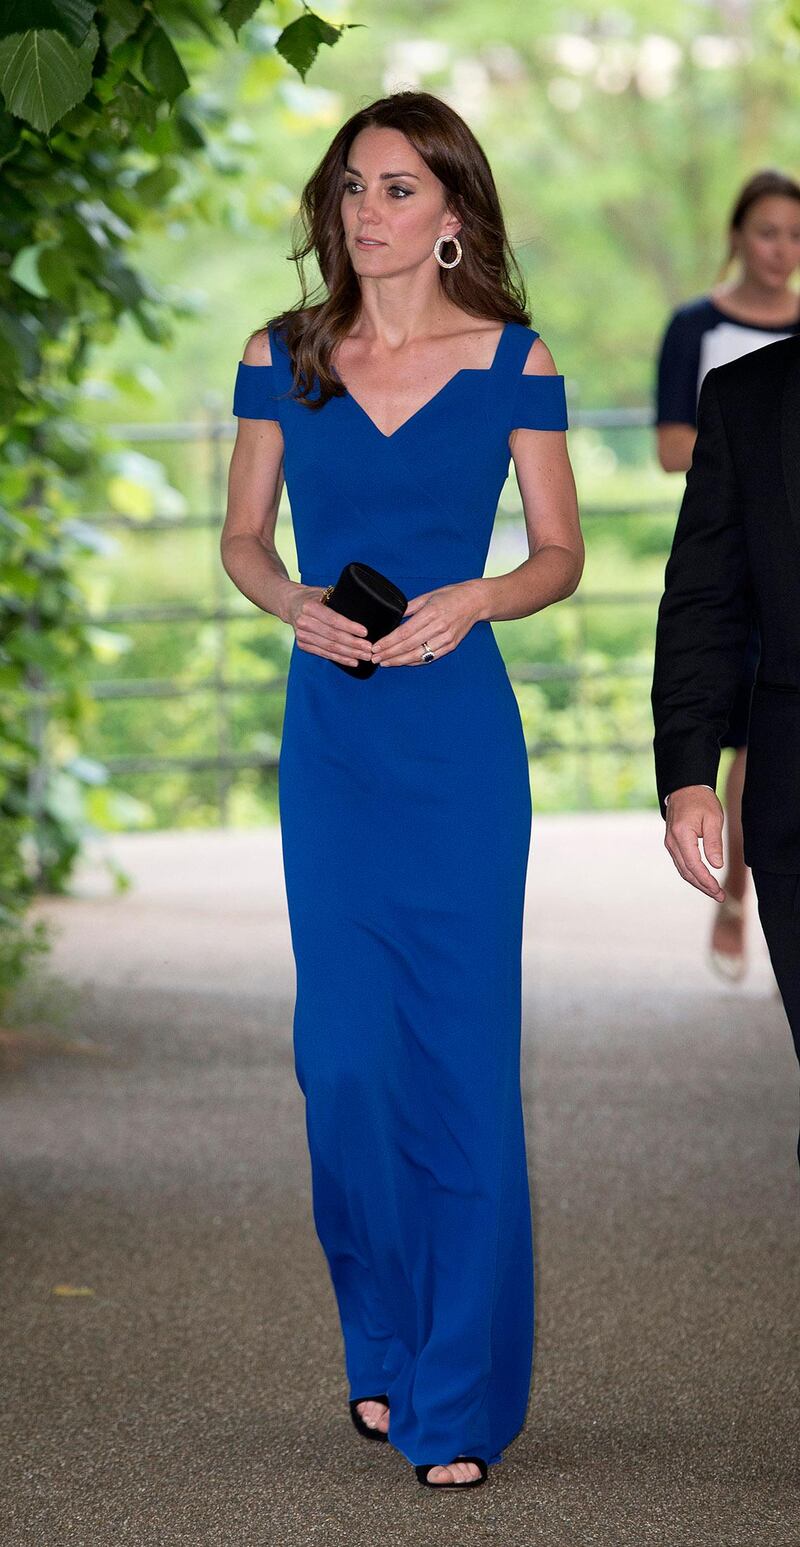 LONDON, UNITED KINGDOM - JUNE 09: Catherine, Duchess of Cambridge attends SportsAid's 40th anniversary dinner on June 9, 2016 in London, England. On arrival, The Duchess will met SportsAid ambassadors and young athletes who will be competing in the Rio 2016 Olympics at a pre-dinner reception, as well as some of the charity's key supporters. (Photo by Eddie Mulholland - WPA Pool/Getty Images)